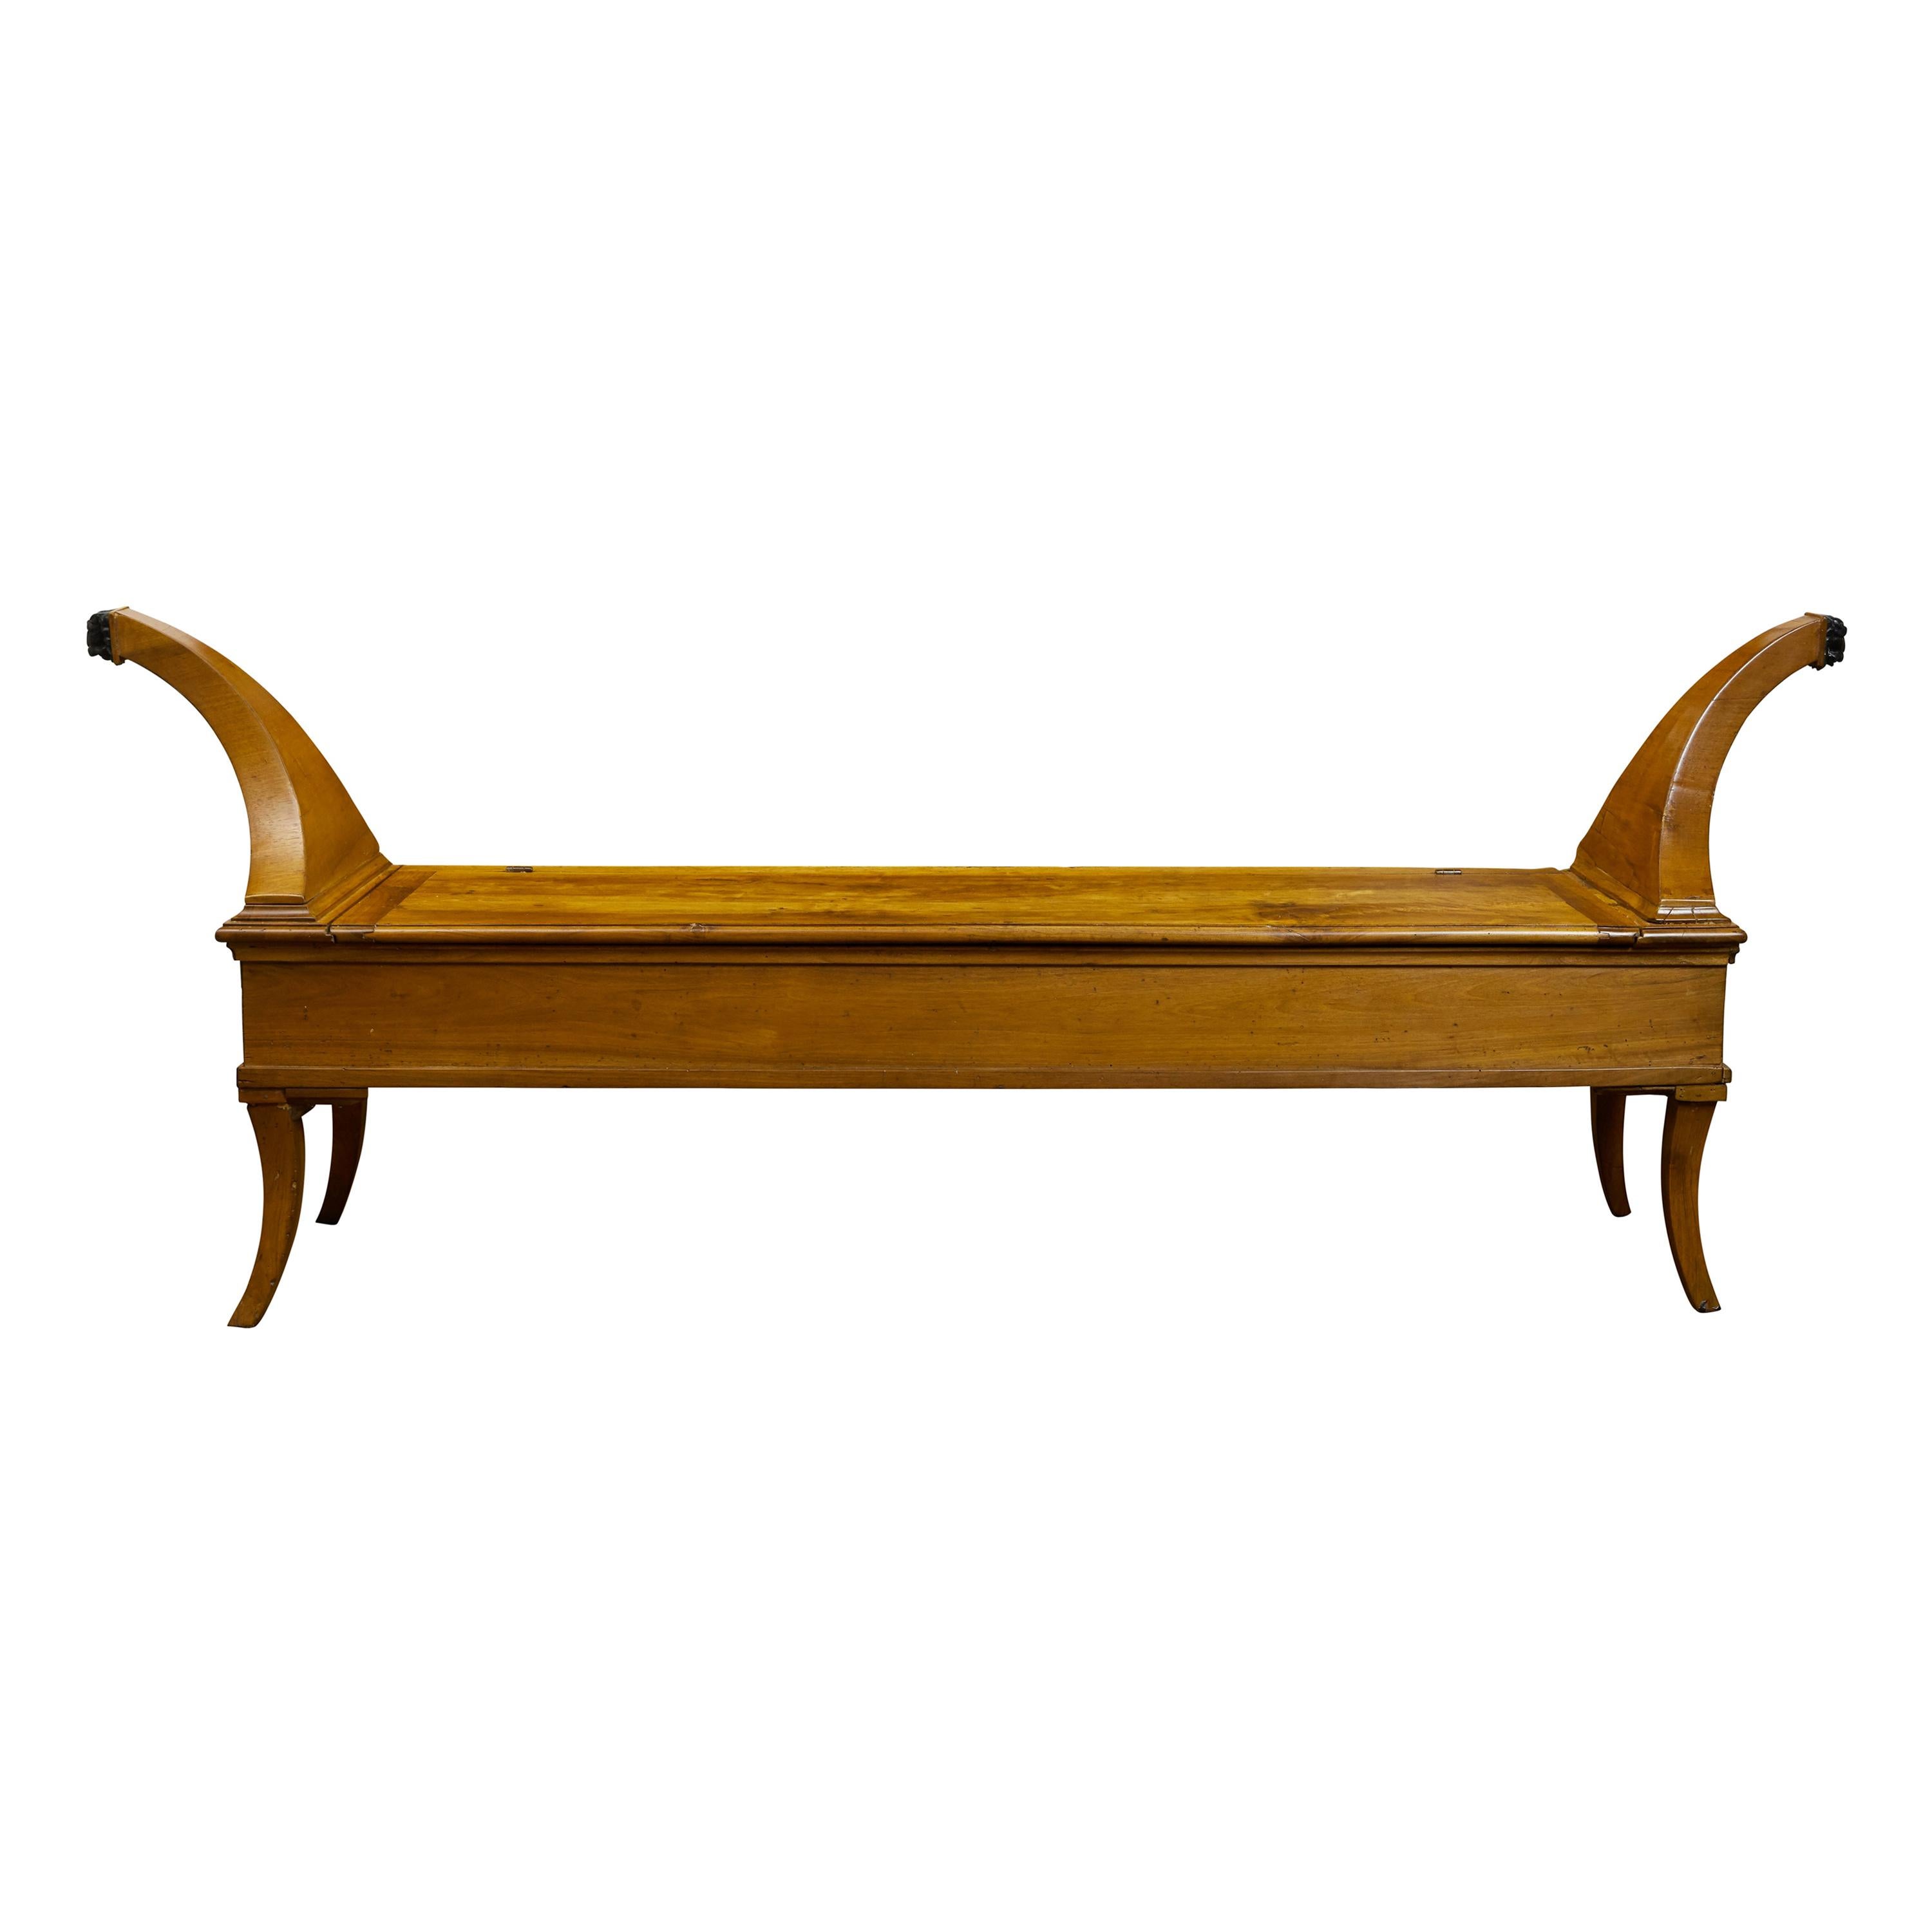 French 1820s Restauration Walnut Bench with Lift-Top Seat and Curving Arms